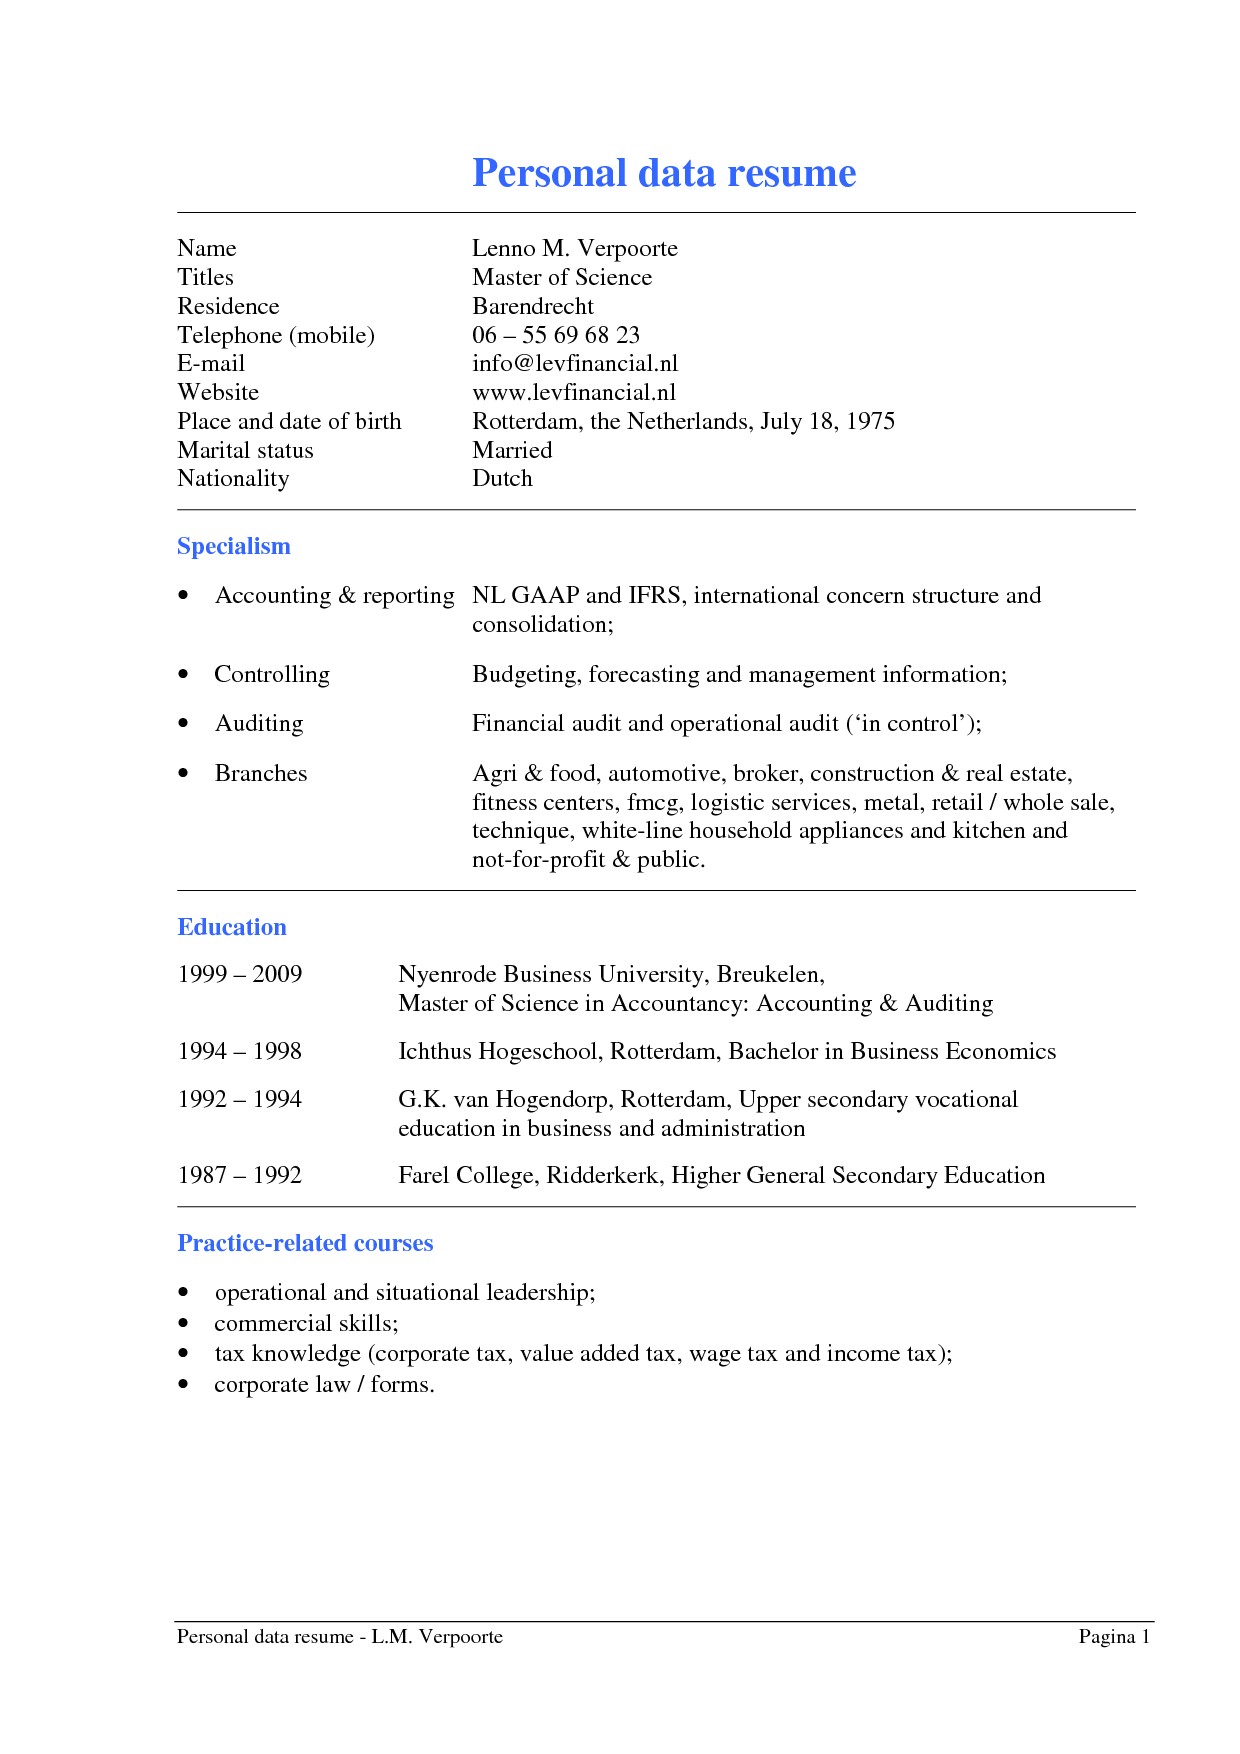 personal data in resume